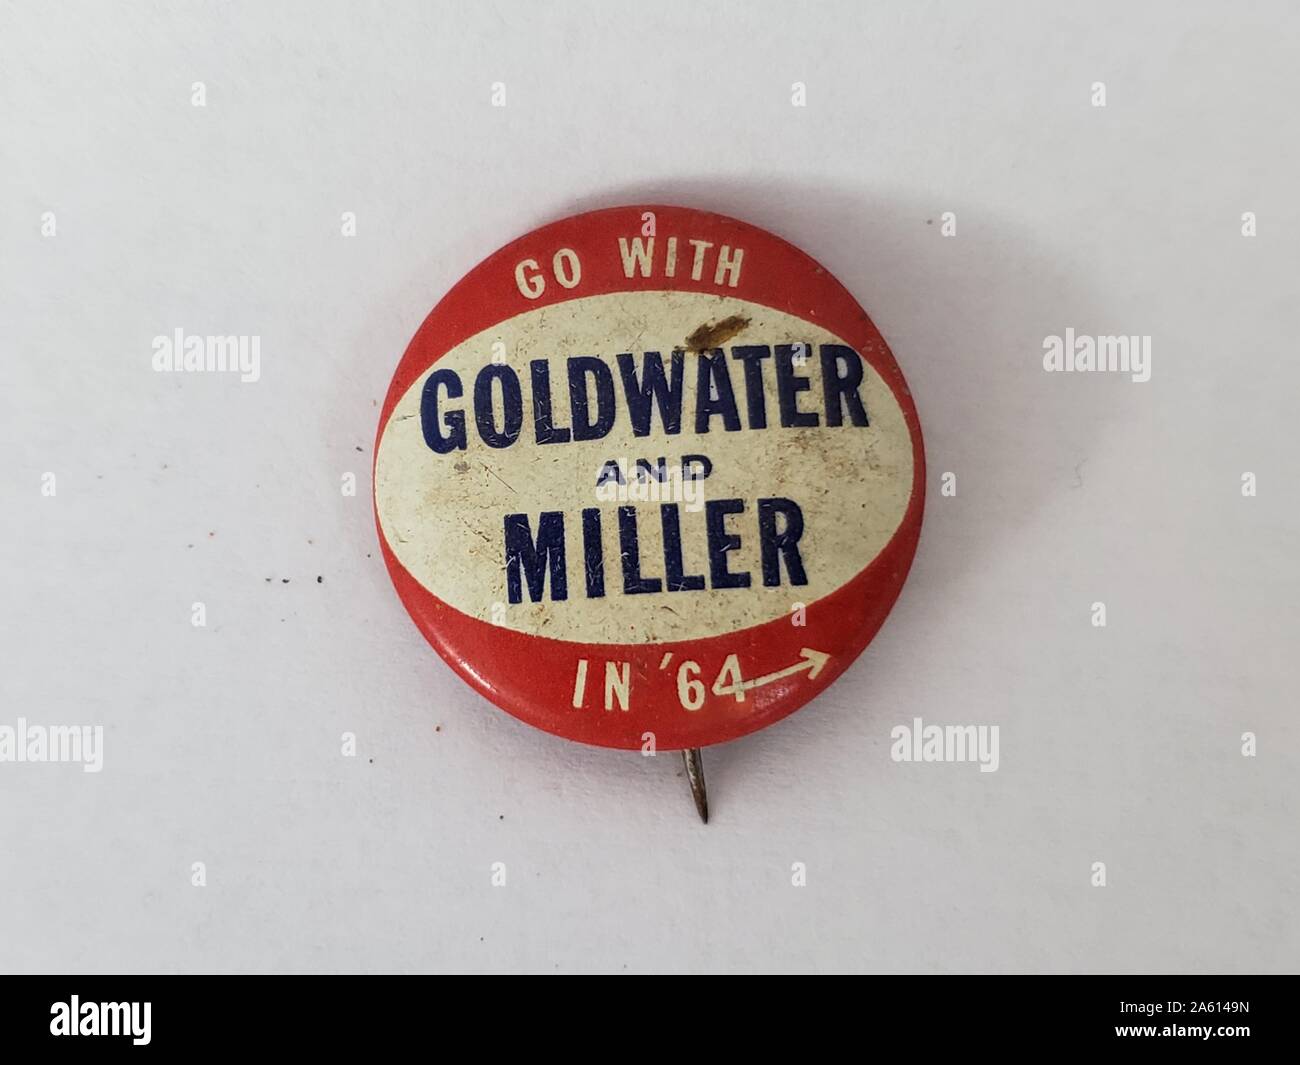 Vintage 1964 Texas Goldwater Miller Campaign Name Sticker 